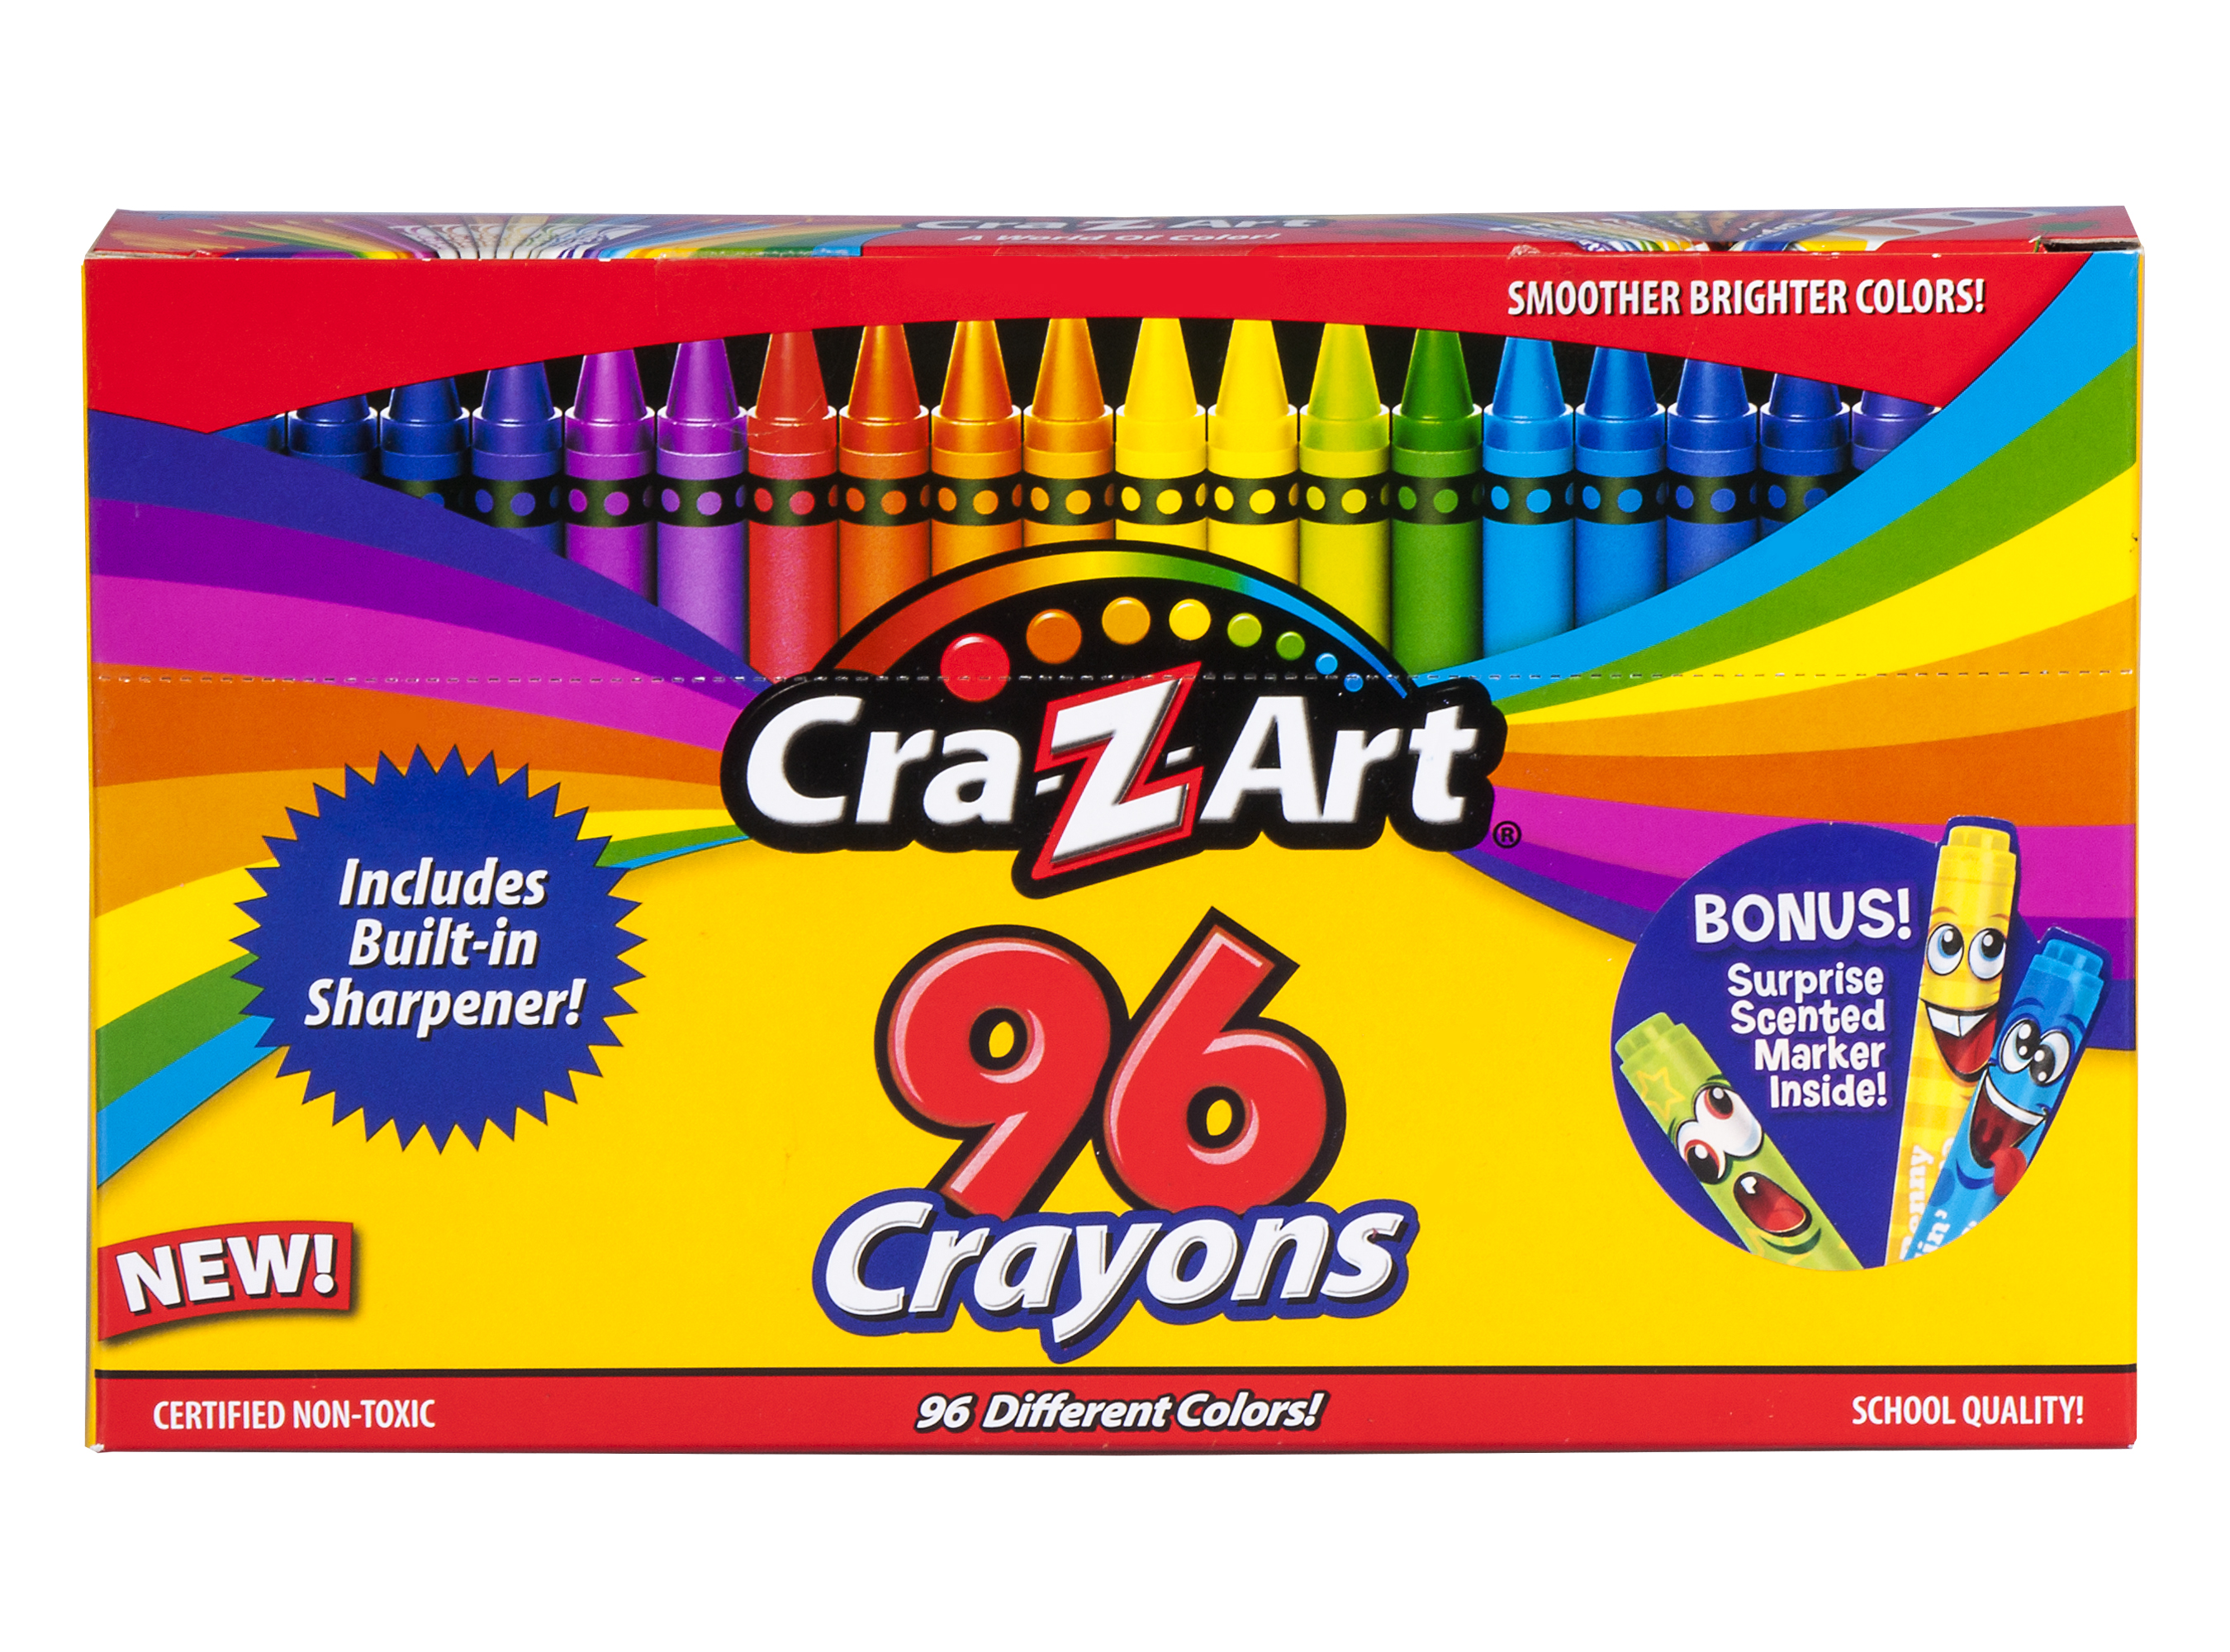 Cra-Z-Art 96 Count Crayons, Bulk Pack with Built-in Sharpener, Multicolor, Back to School - image 1 of 10